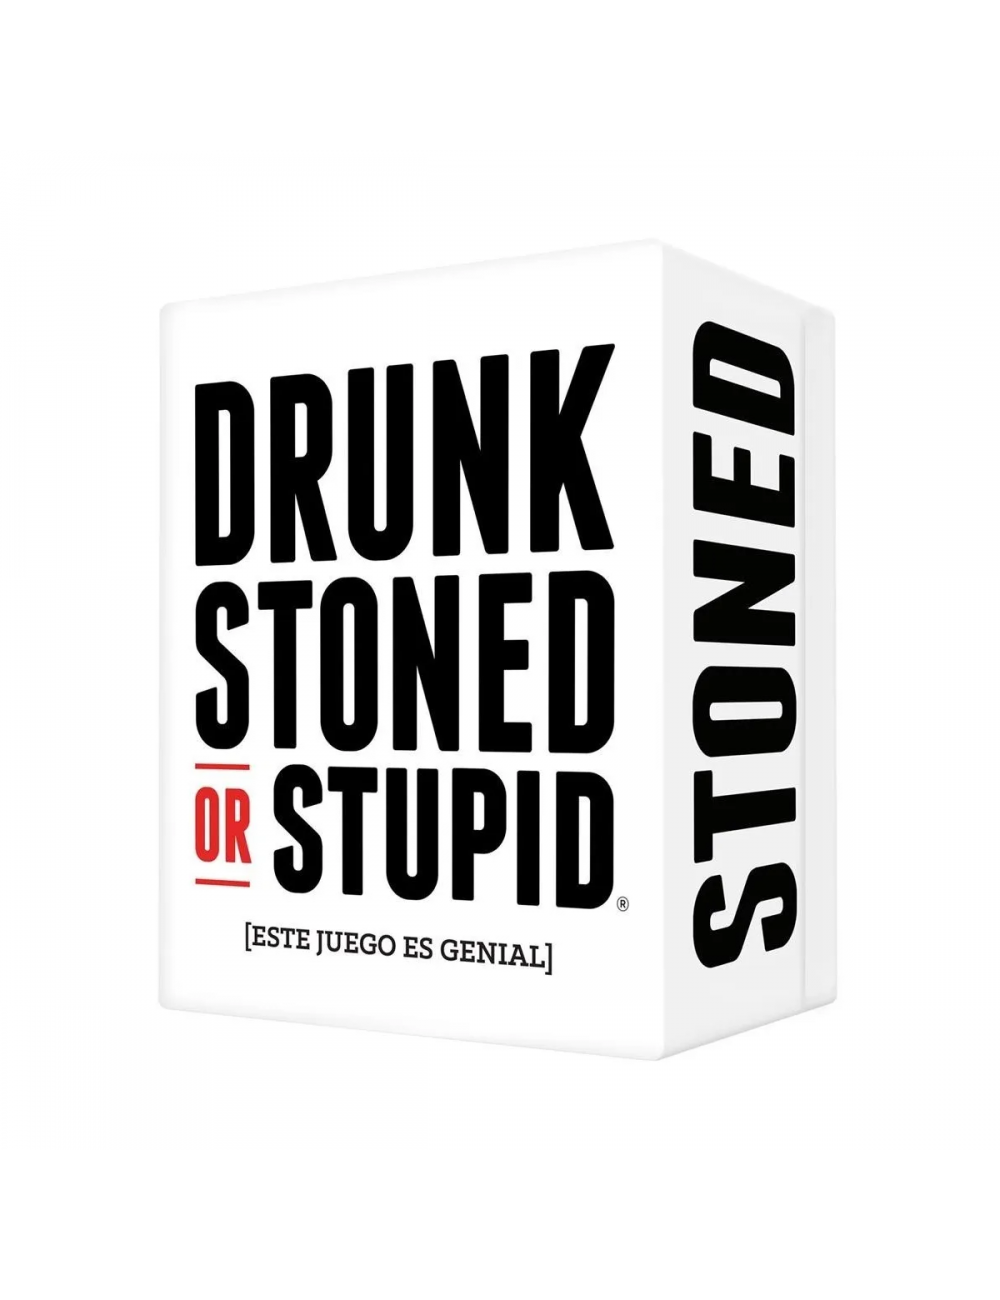 Drunk Stoned or Stupid DSS-SP01  Asmodee